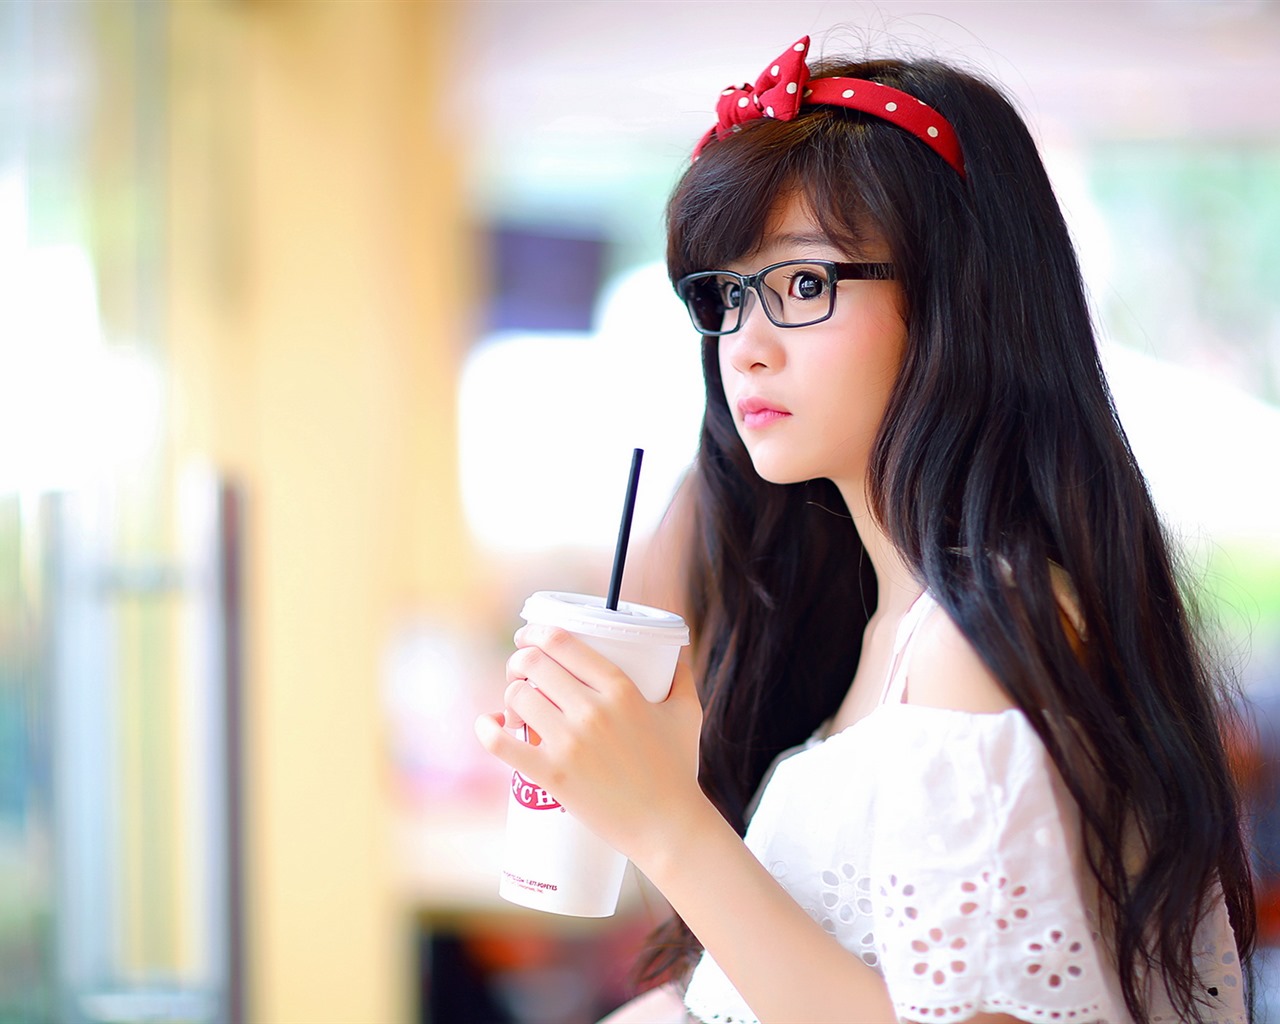 Pure and lovely young Asian girl HD wallpapers collection (3) #32 - 1280x1024